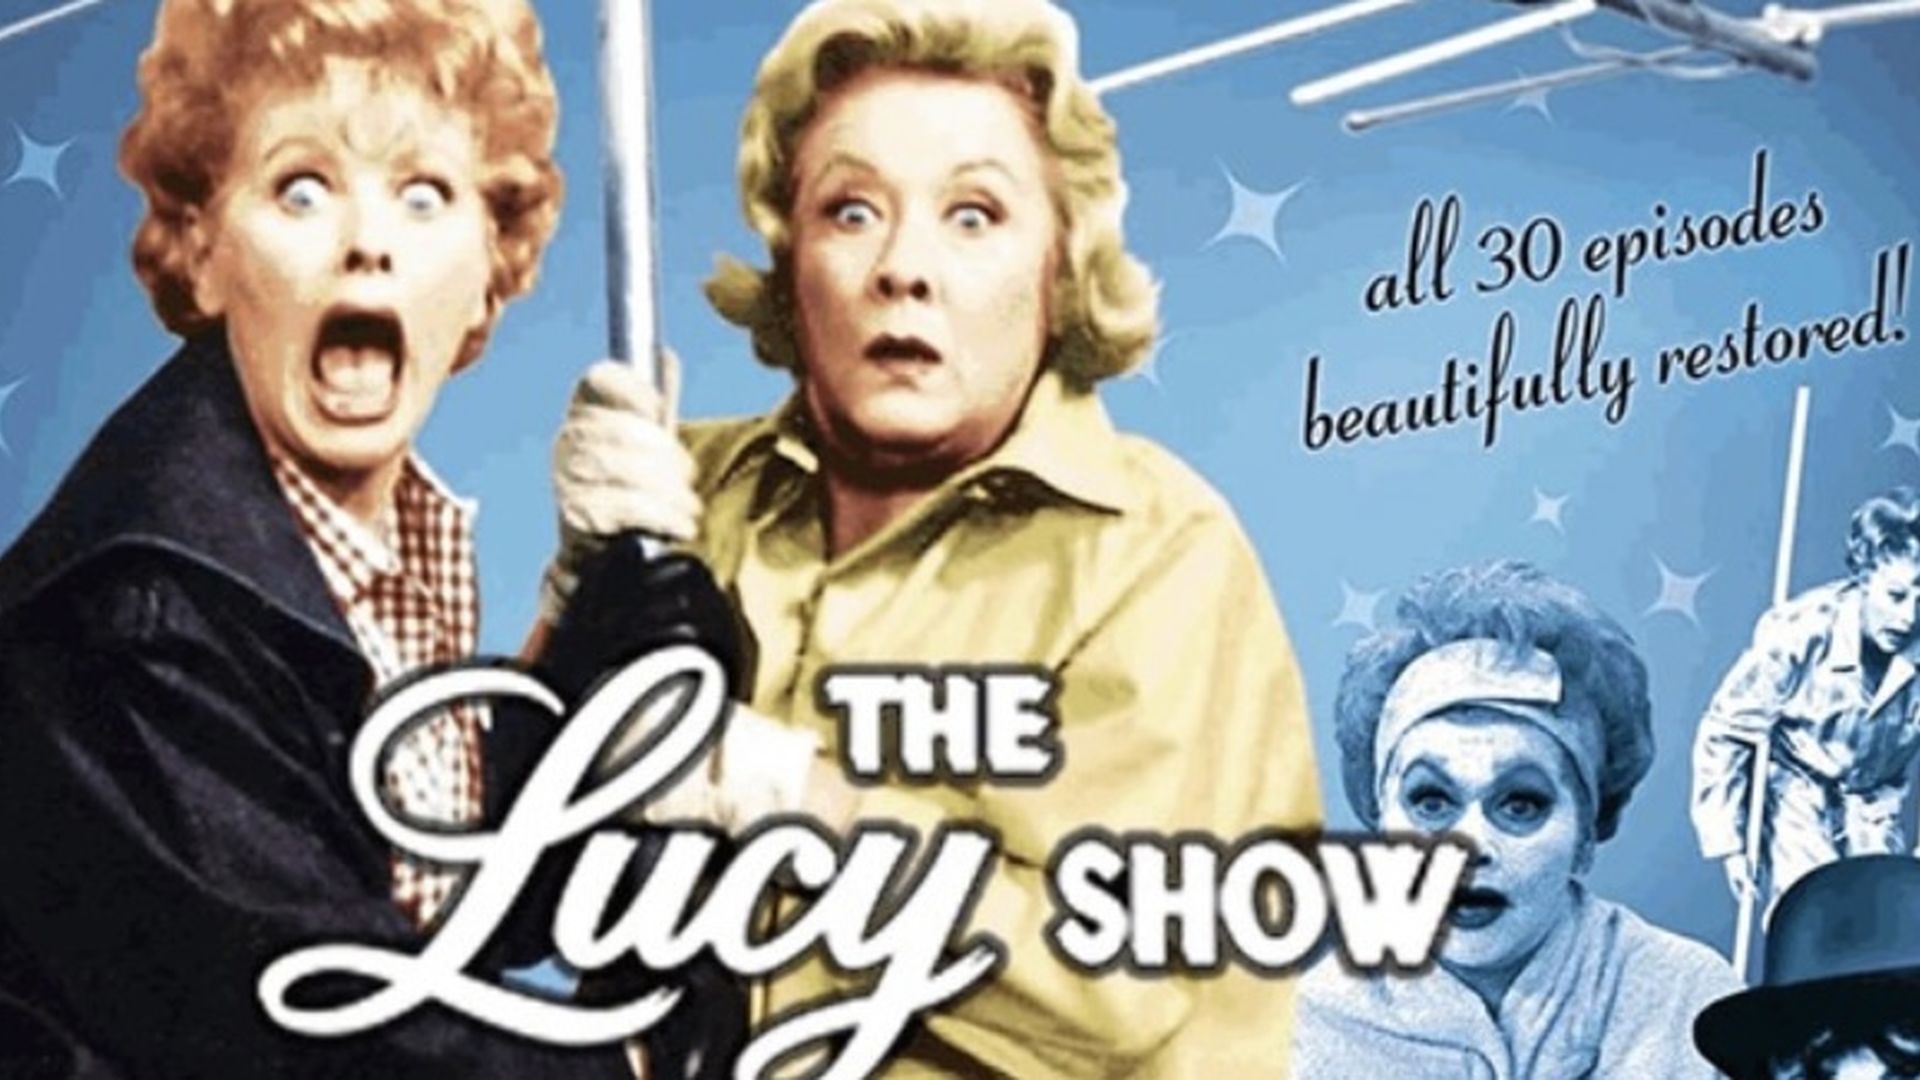 THE LUCY SHOW S1 E1